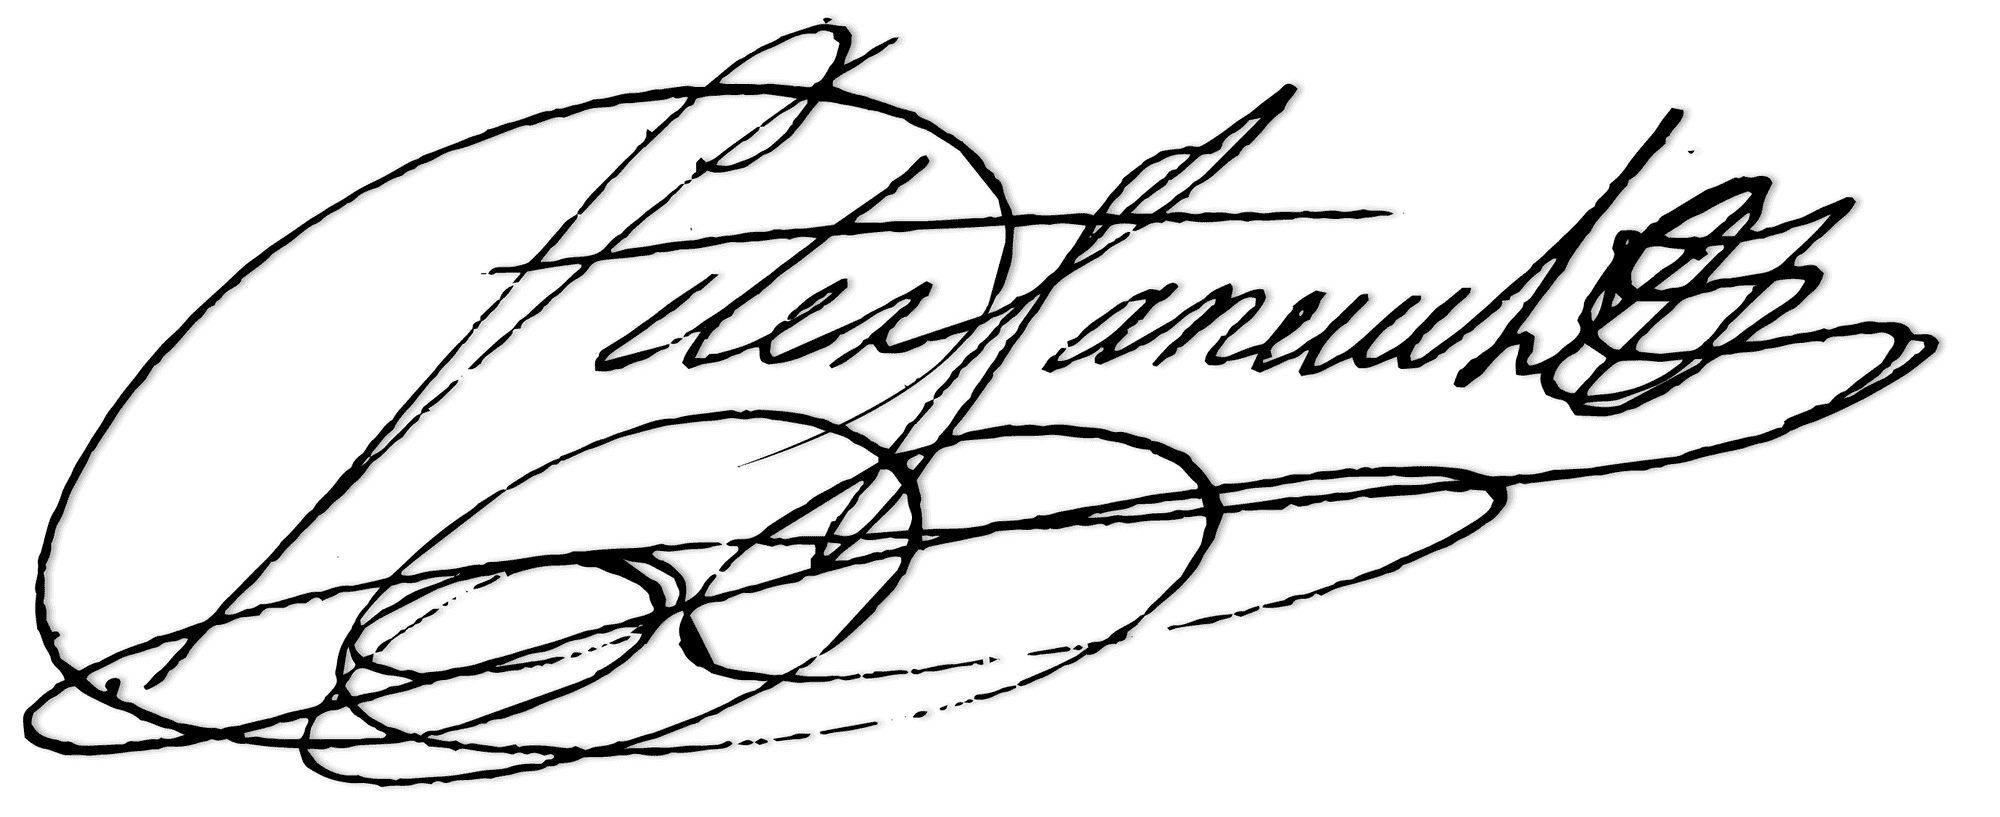 Peter Faneuil's signature